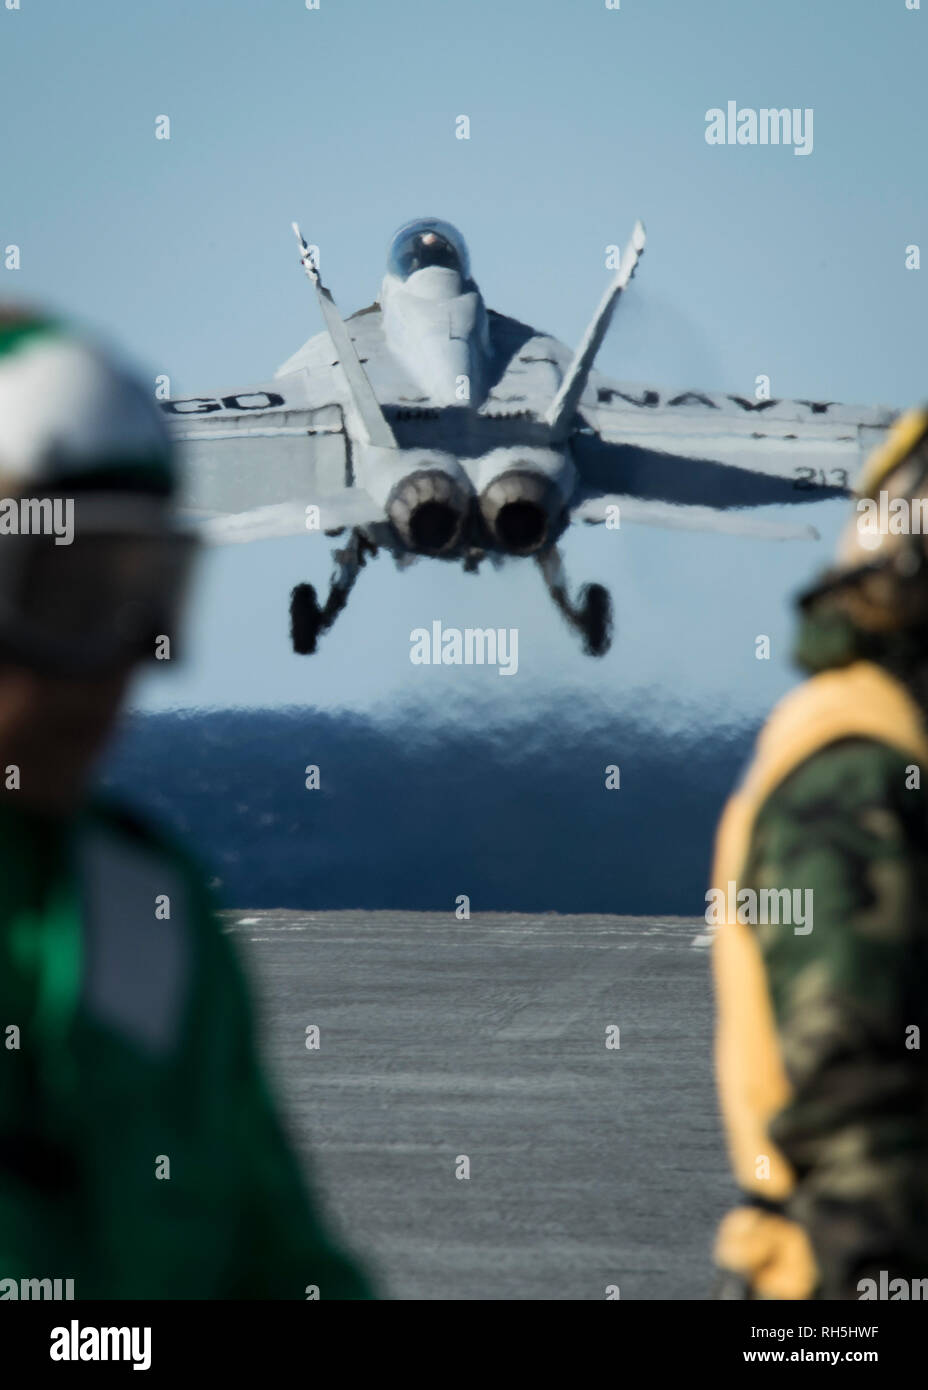 ATLANTIC OCEAN (Jan 19, 2018) -- An F/A-18F Super Hornet, assigned to the 'Black Lions' of Strike Fighter Squadron (VFA) 213, takes off from USS Gerald R. Ford (CVN 78) during flight operations. Ford is underway conducting test and evaluation operations. (U.S. Navy photo by Mass Communication Specialist 3rd Class Ryan Carter) Stock Photo